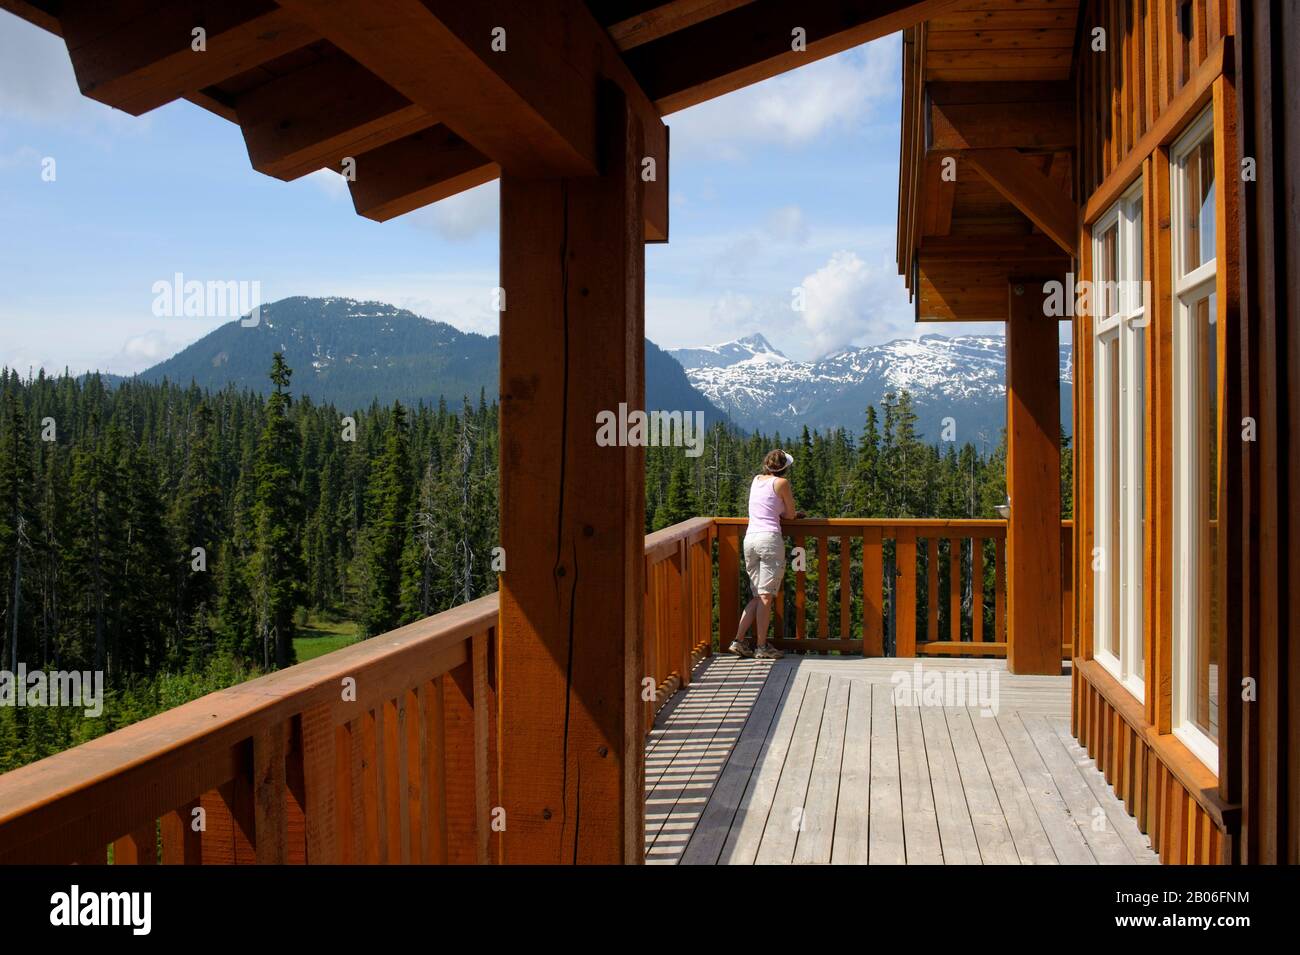 CANADA, BRITISH COLUMBIA, VANCOUVER ISLAND, STRATHCONA PROVINCIAL PARK, RAVEN LODGE WITH WOMAN ON DECK (MODEL RELEASED) Stock Photo